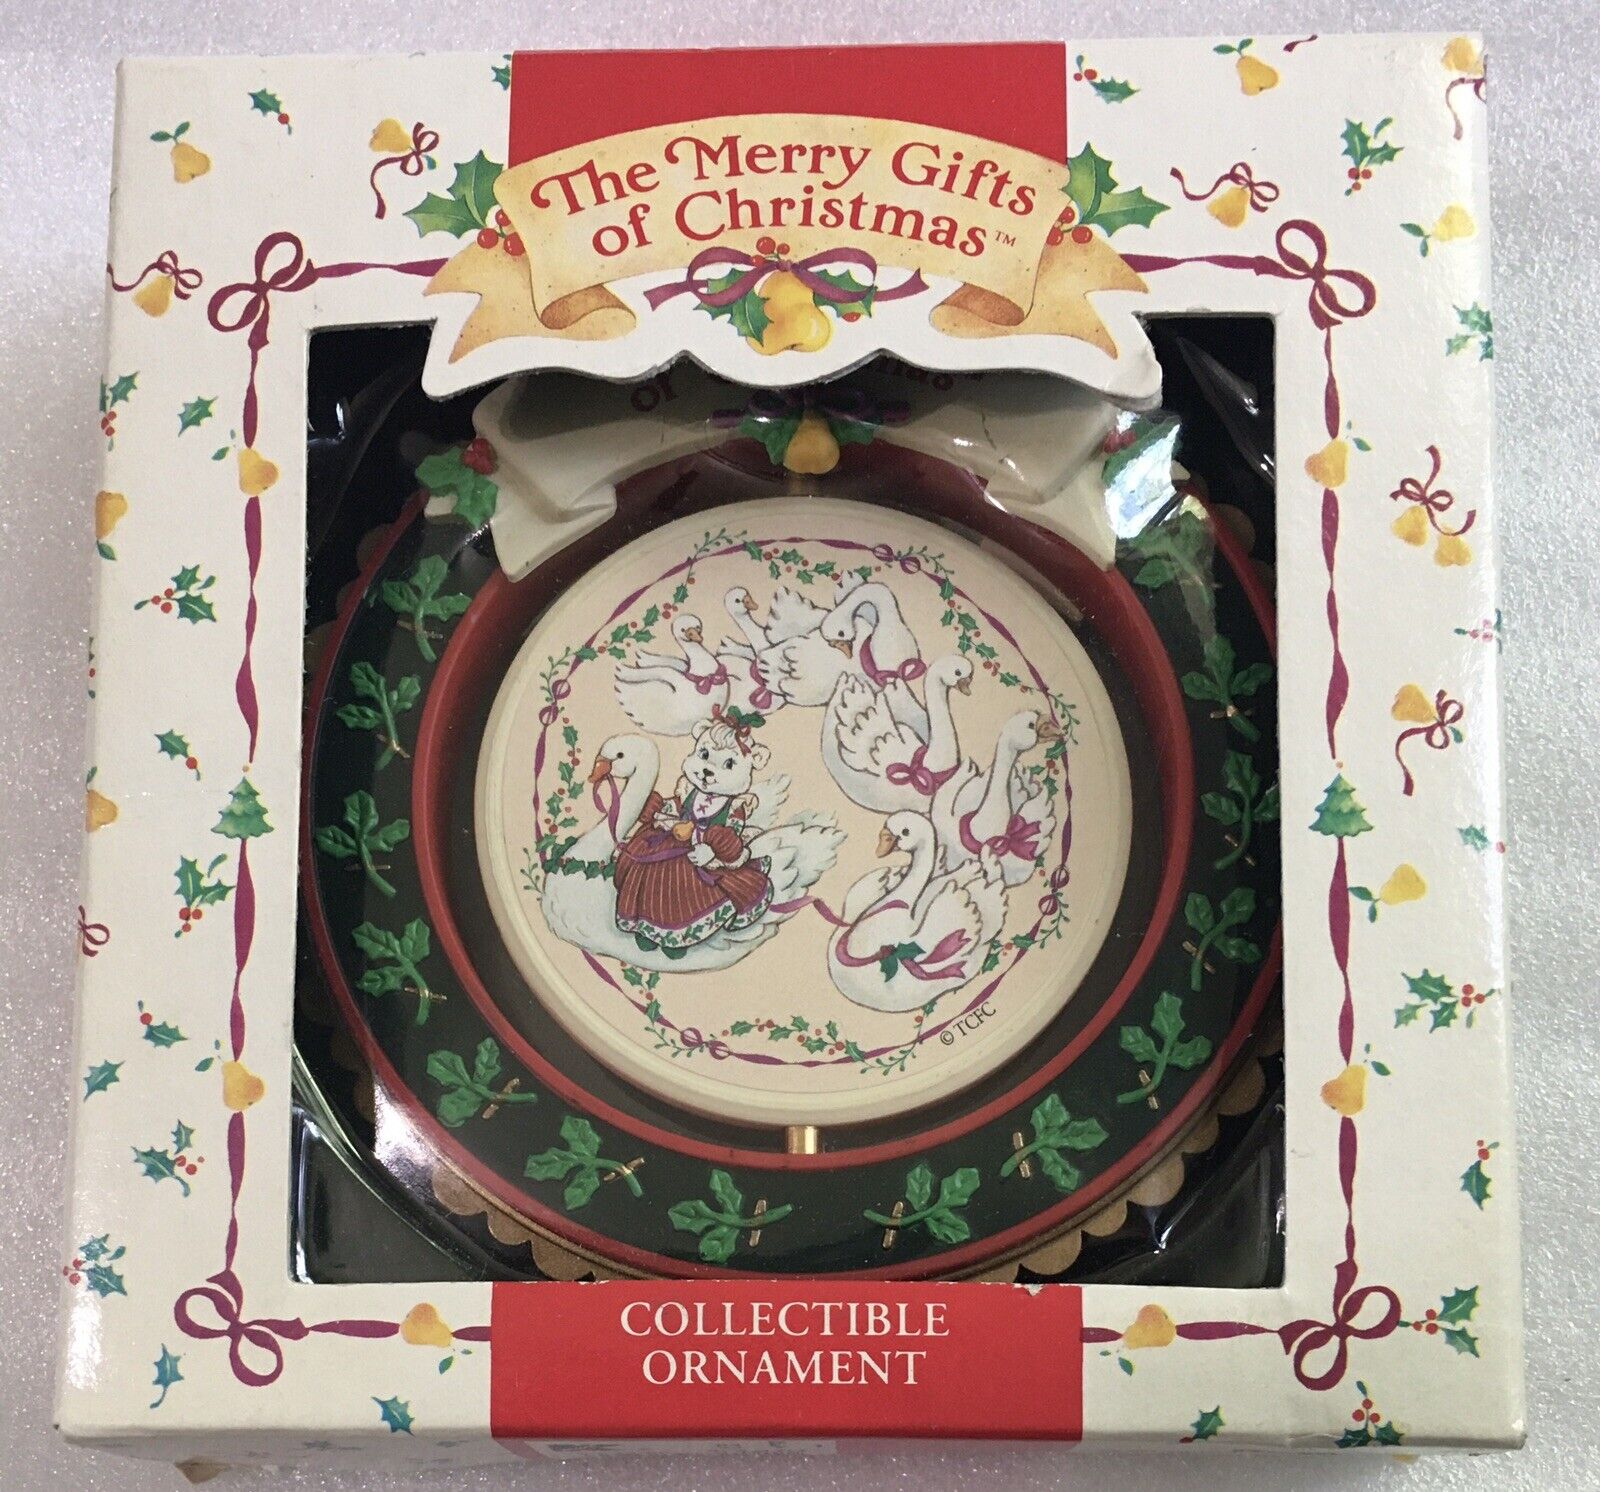 1993 TCFC 7 Swans Merry Gifts Christmas Ornament Characters Cleveland KMart